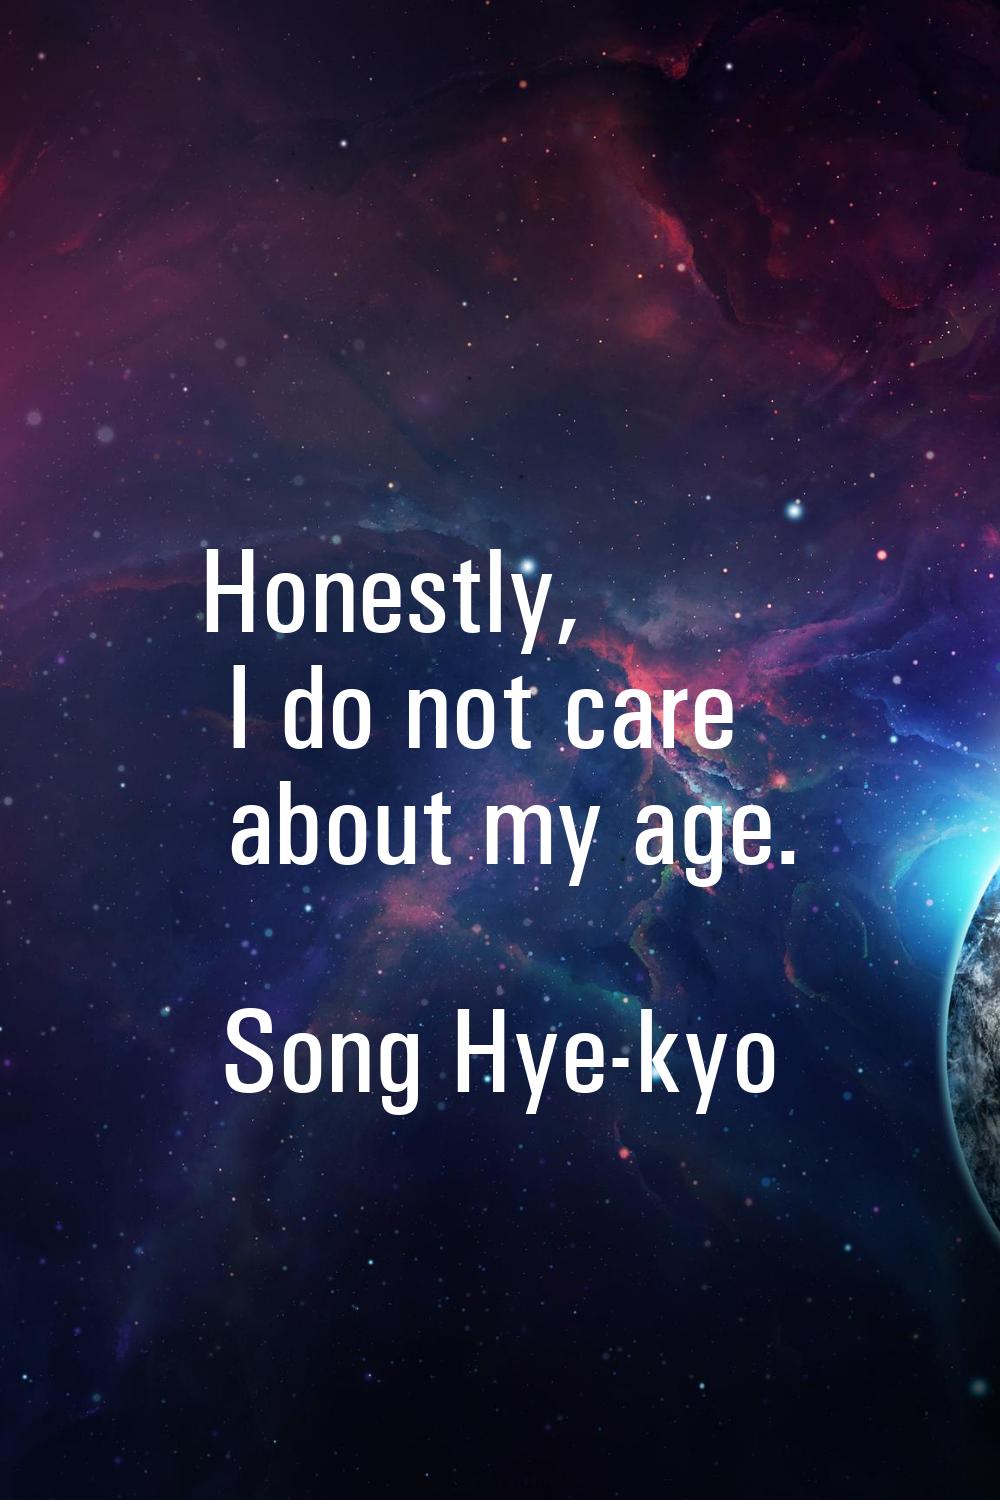 Honestly, I do not care about my age.